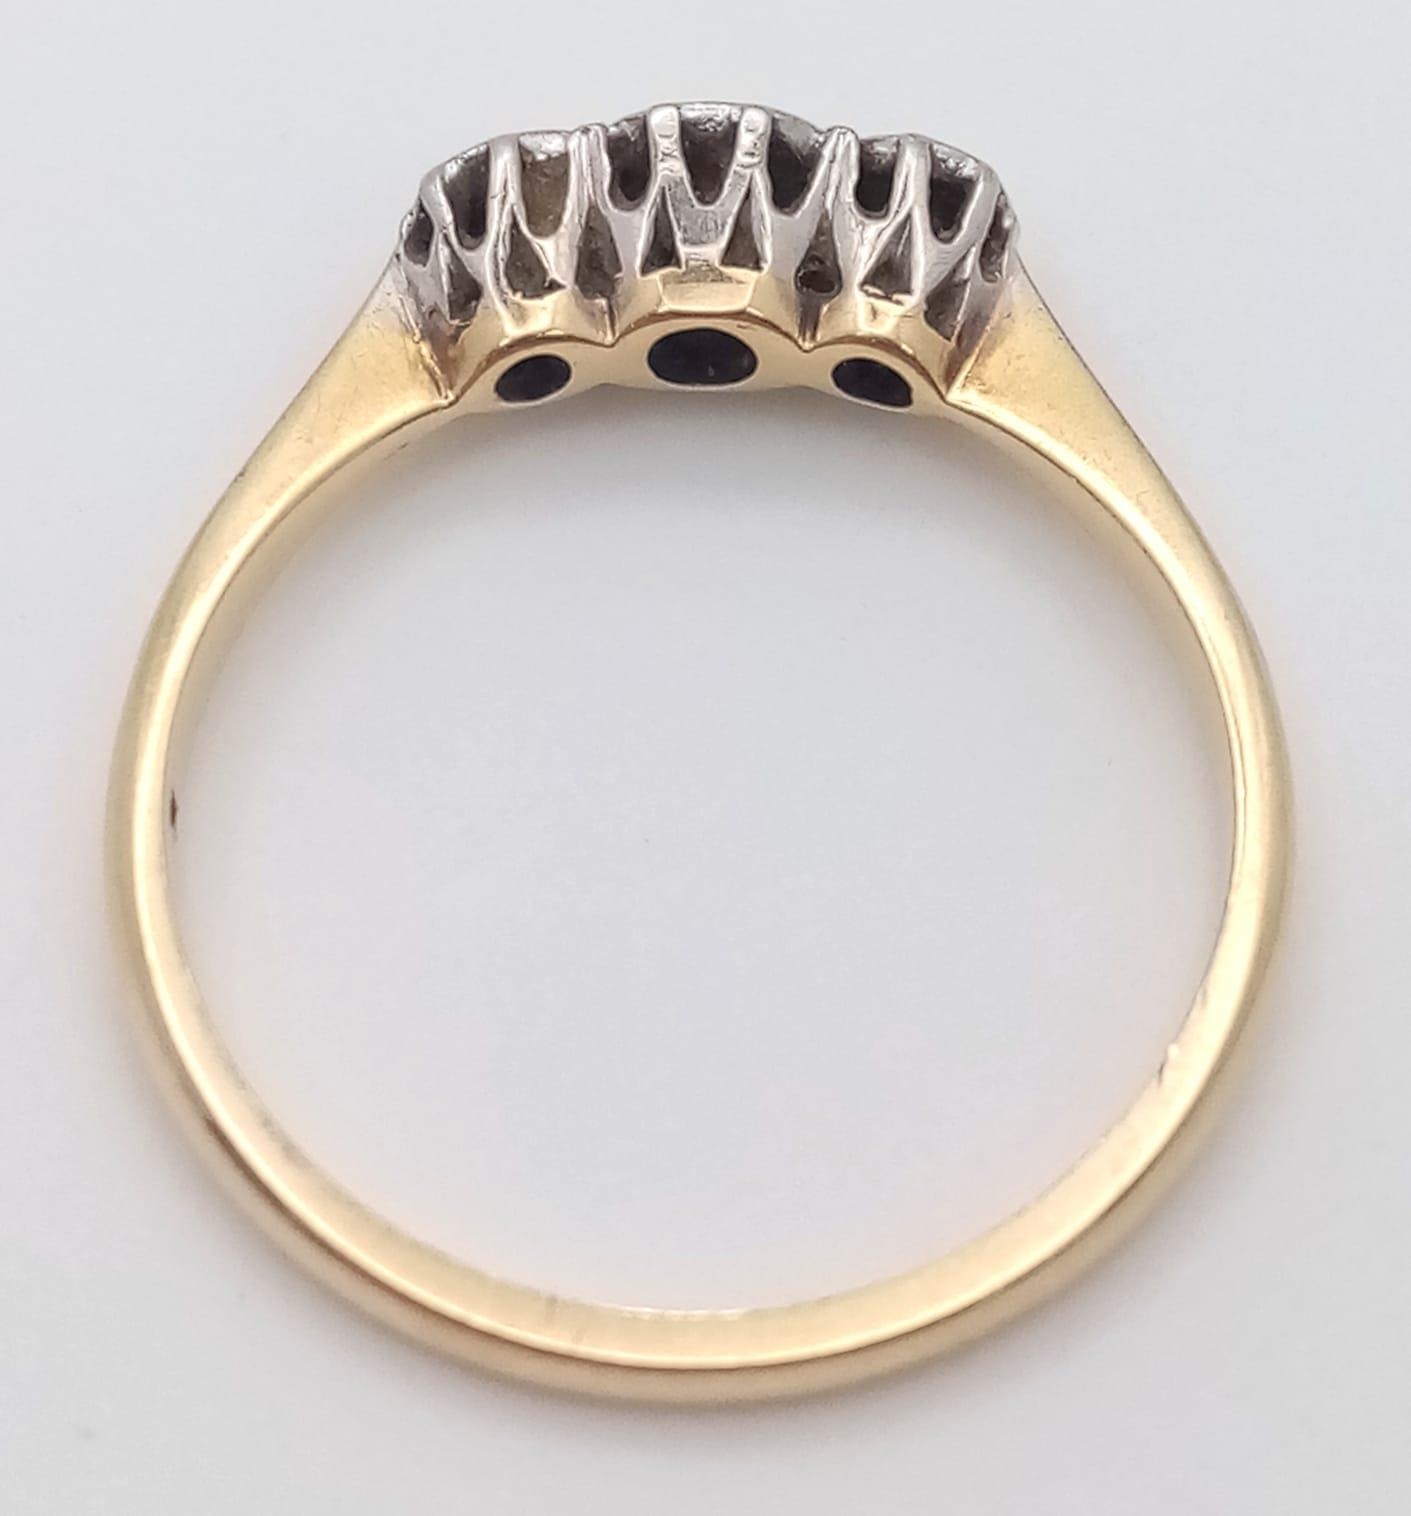 An 18 K yellow gold and platinum ring with a trilogy of round cut diamonds, size: L, weight: 1.9 g. - Image 3 of 4